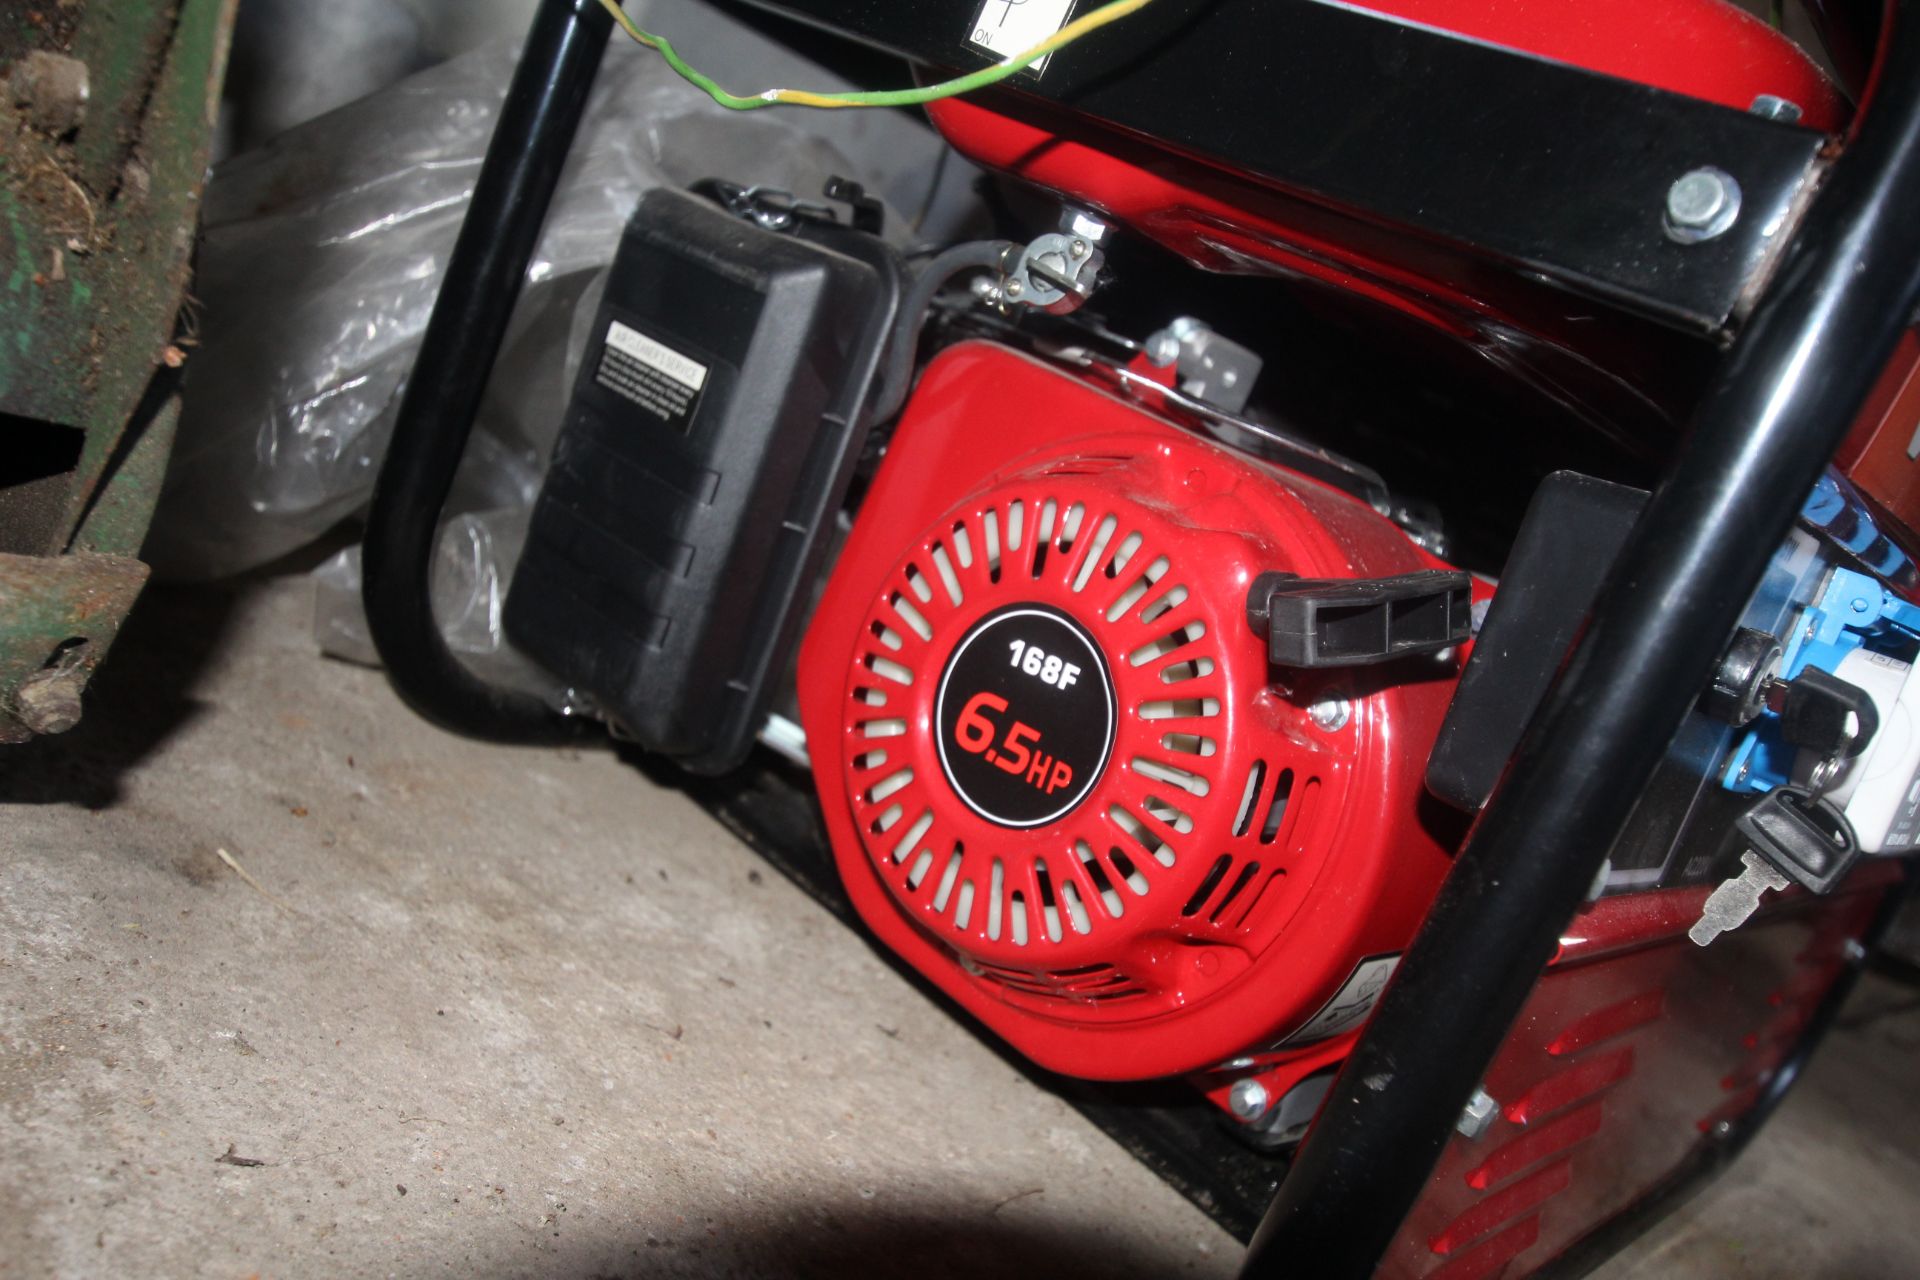 6.5hp petrol generator as new but requires a petrol pipe. - Image 5 of 7